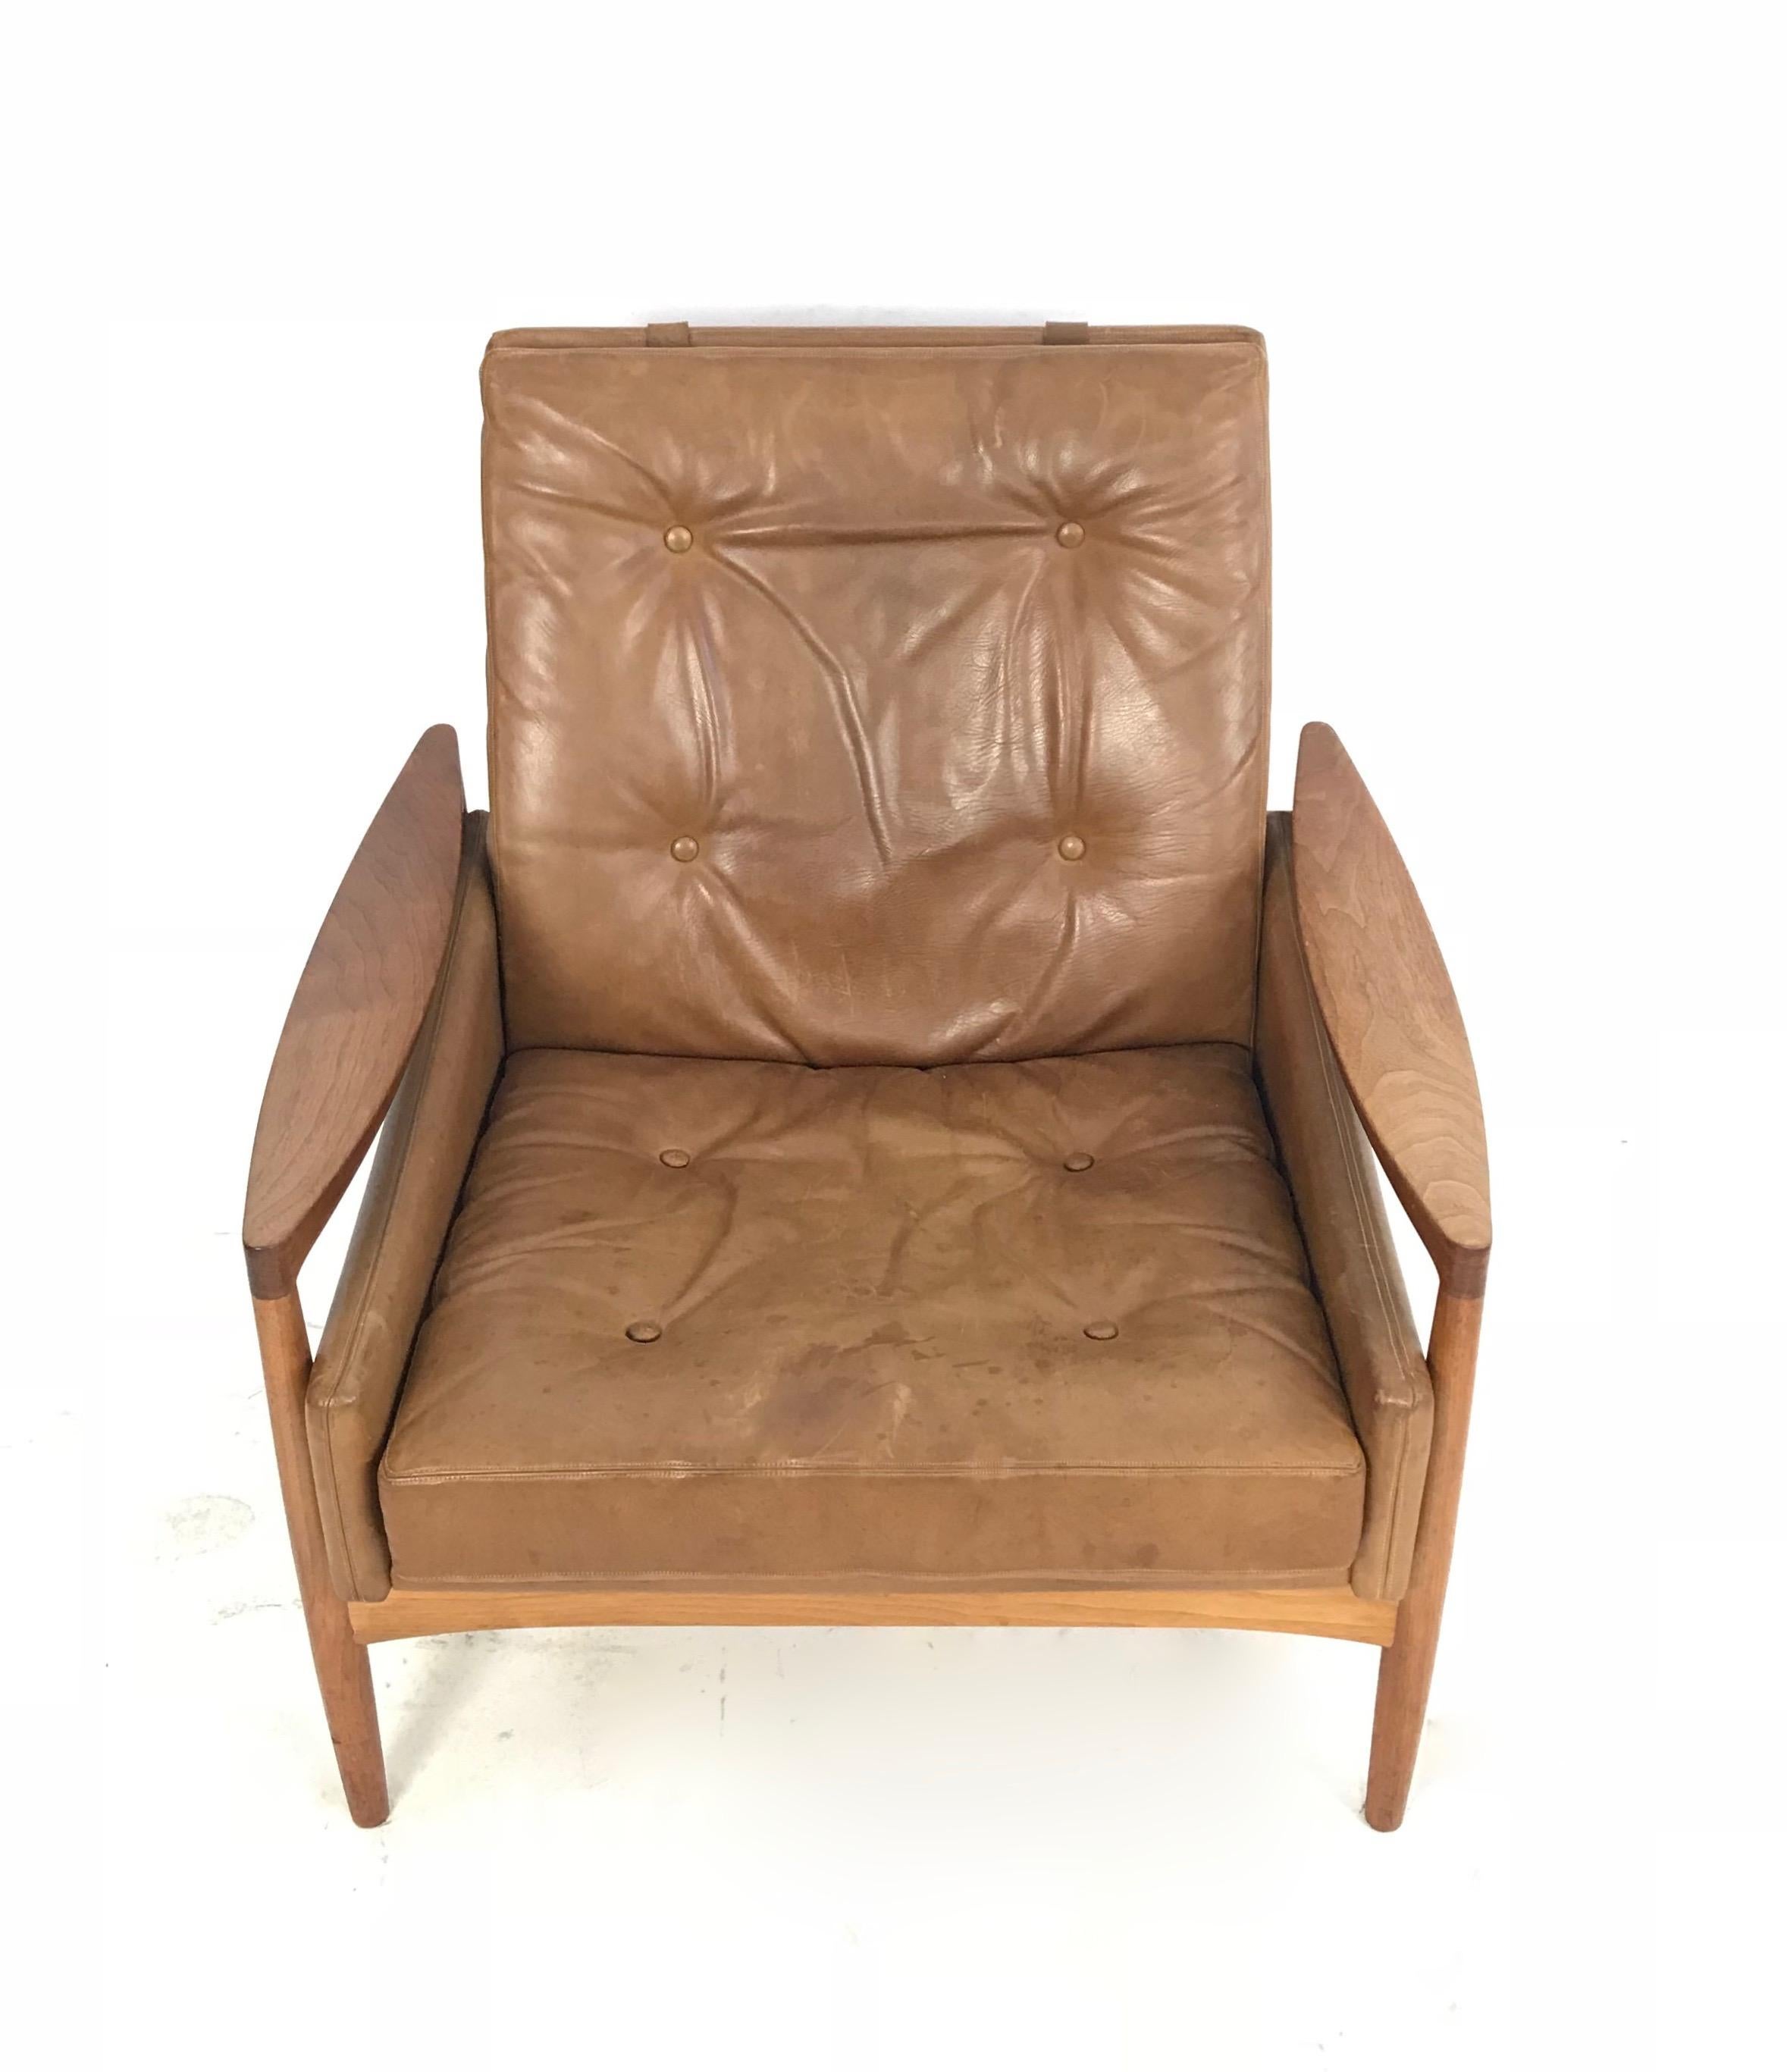 This is a sleek and unusual Danish modern wood and brown leather accent chair by Erik Worts, circa 1960.